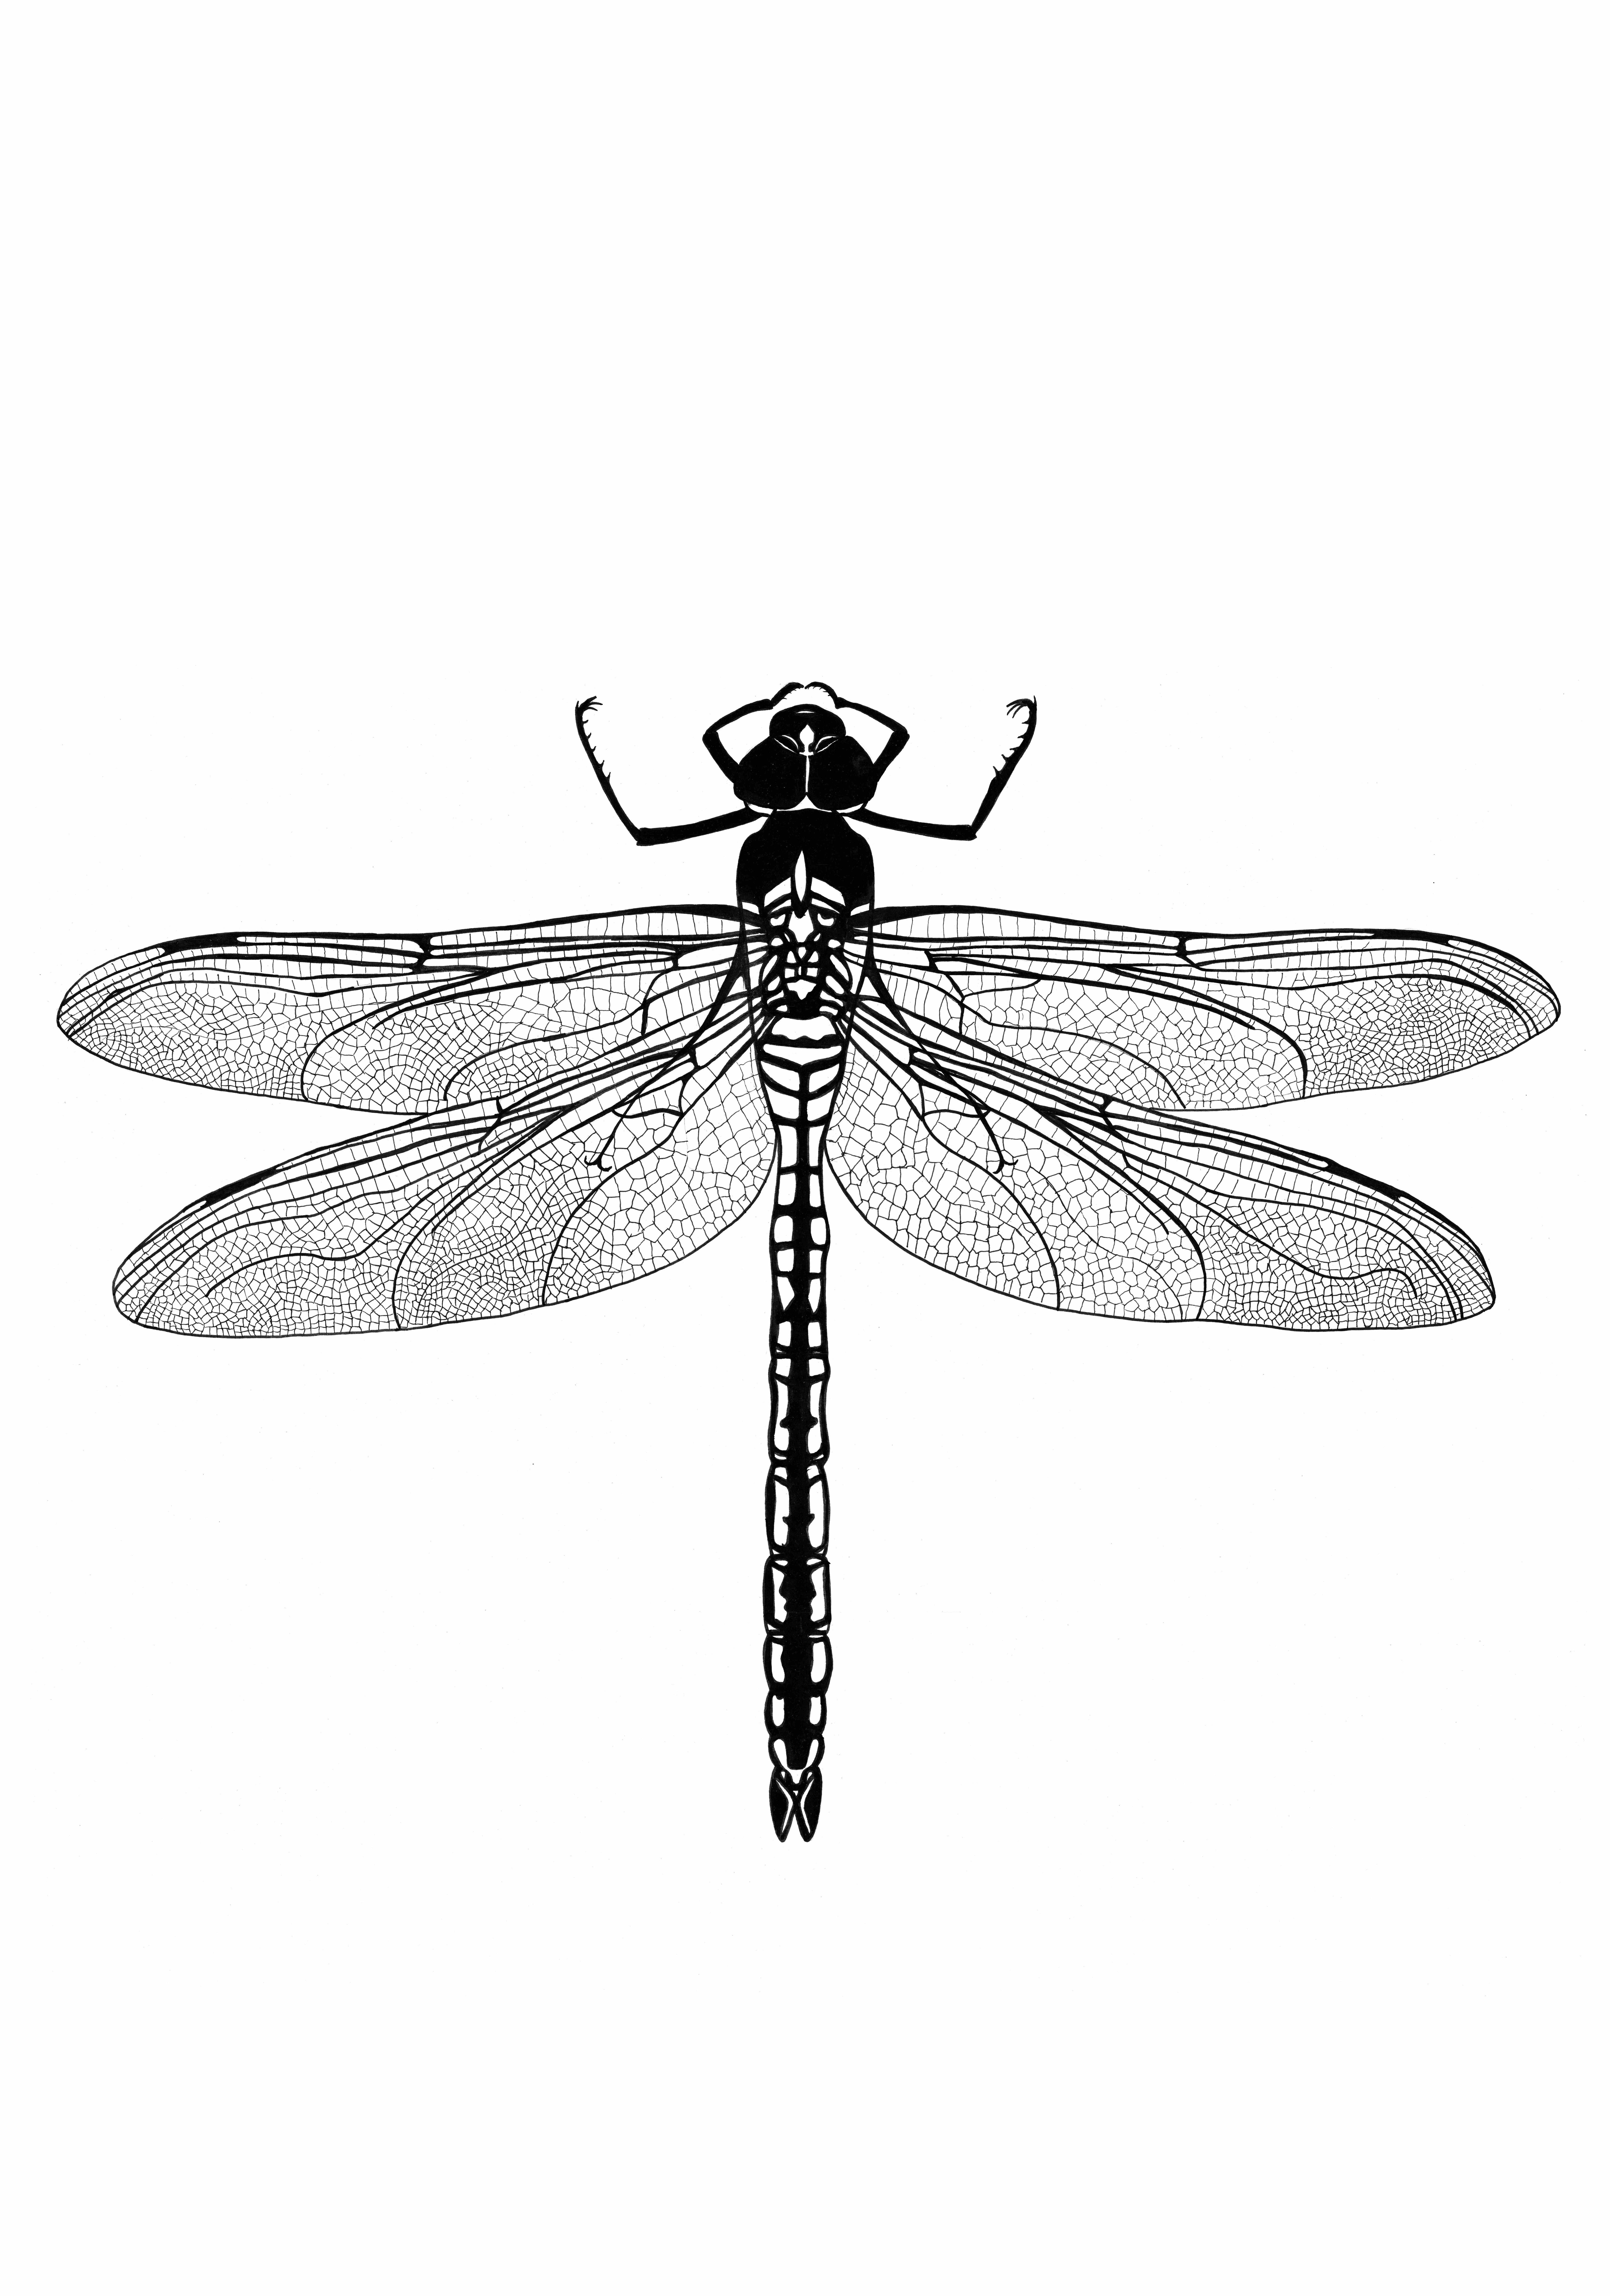 Dragonfly 2 | Ink Drawing by Debbie New